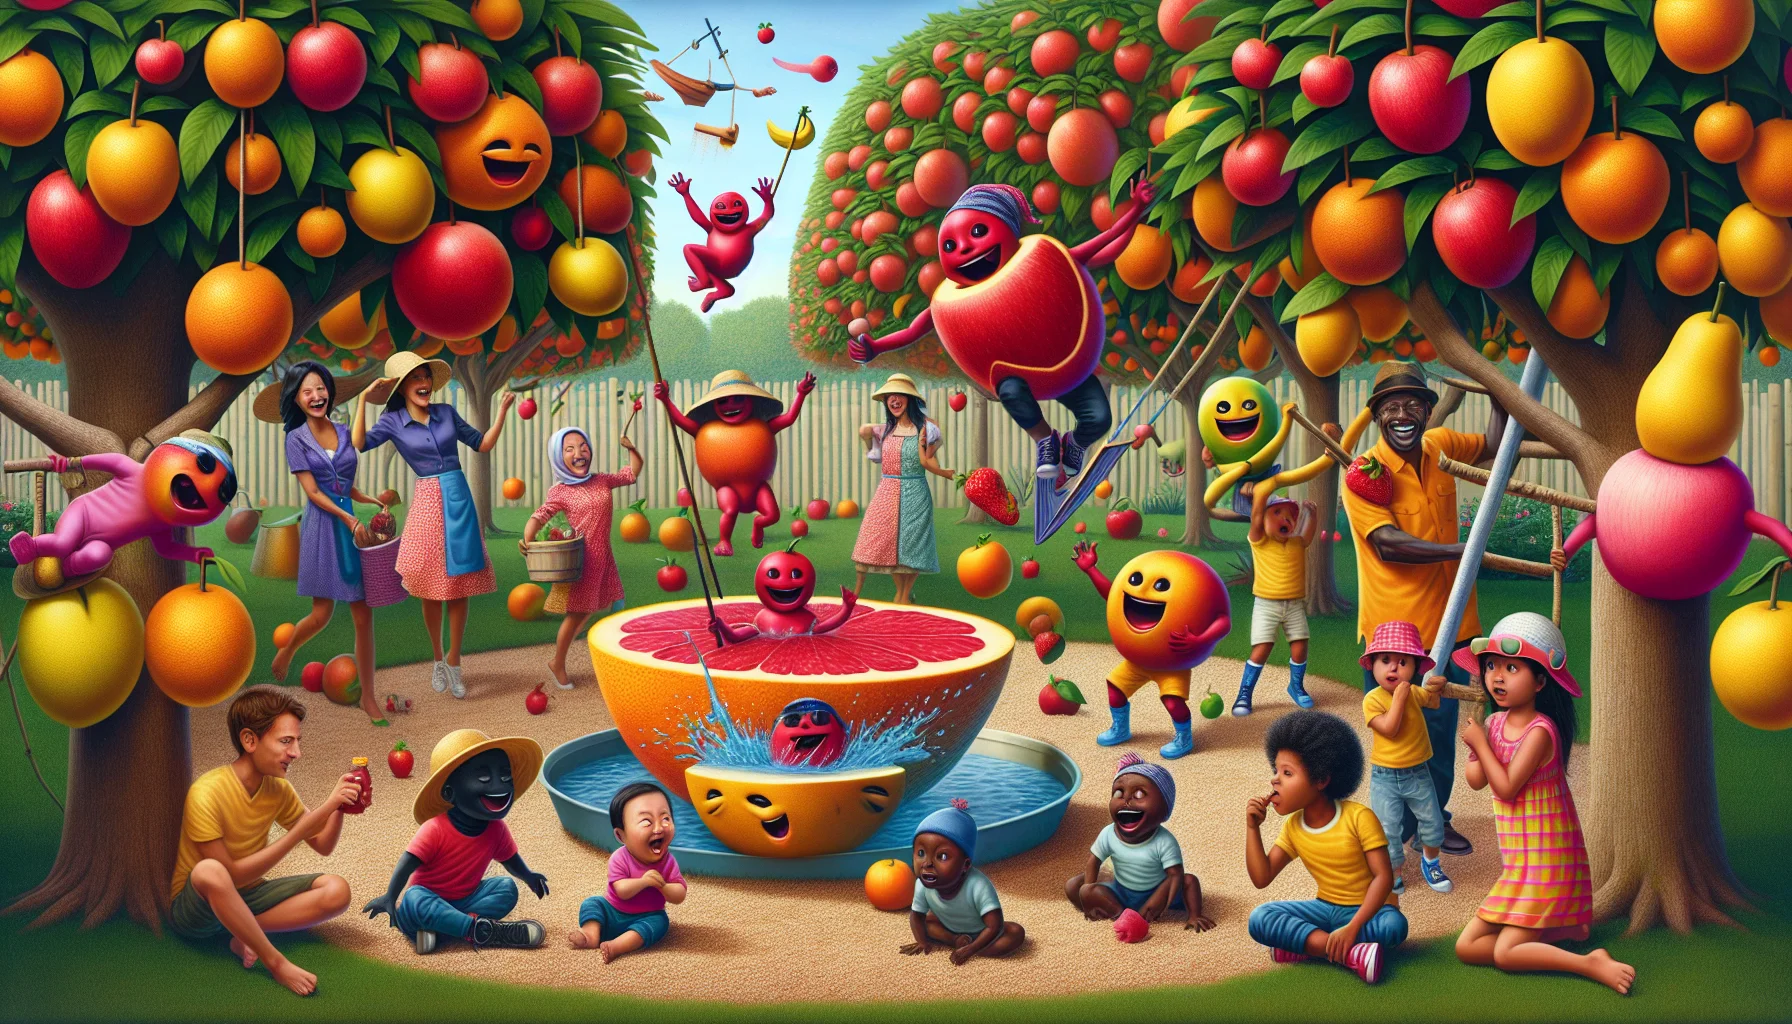 Imagine a humorous garden scene filled with an array of tropical fruit trees abundant with bright red fruits. In the midst of these, a variety of jovial, animated fruits are depicted partaking in whimsical activities like swinging from tree branches or diving into a pool made from a half-cut fruit. An East Asian woman and a black man, both dressed in vibrant gardening attire with gloves and hats, are laughing and enjoying the spectacle. Two children, one Hispanic boy and one Middle-Eastern girl, curiously watching the animated fruits. This scene aims to radiate the joy of gardening.